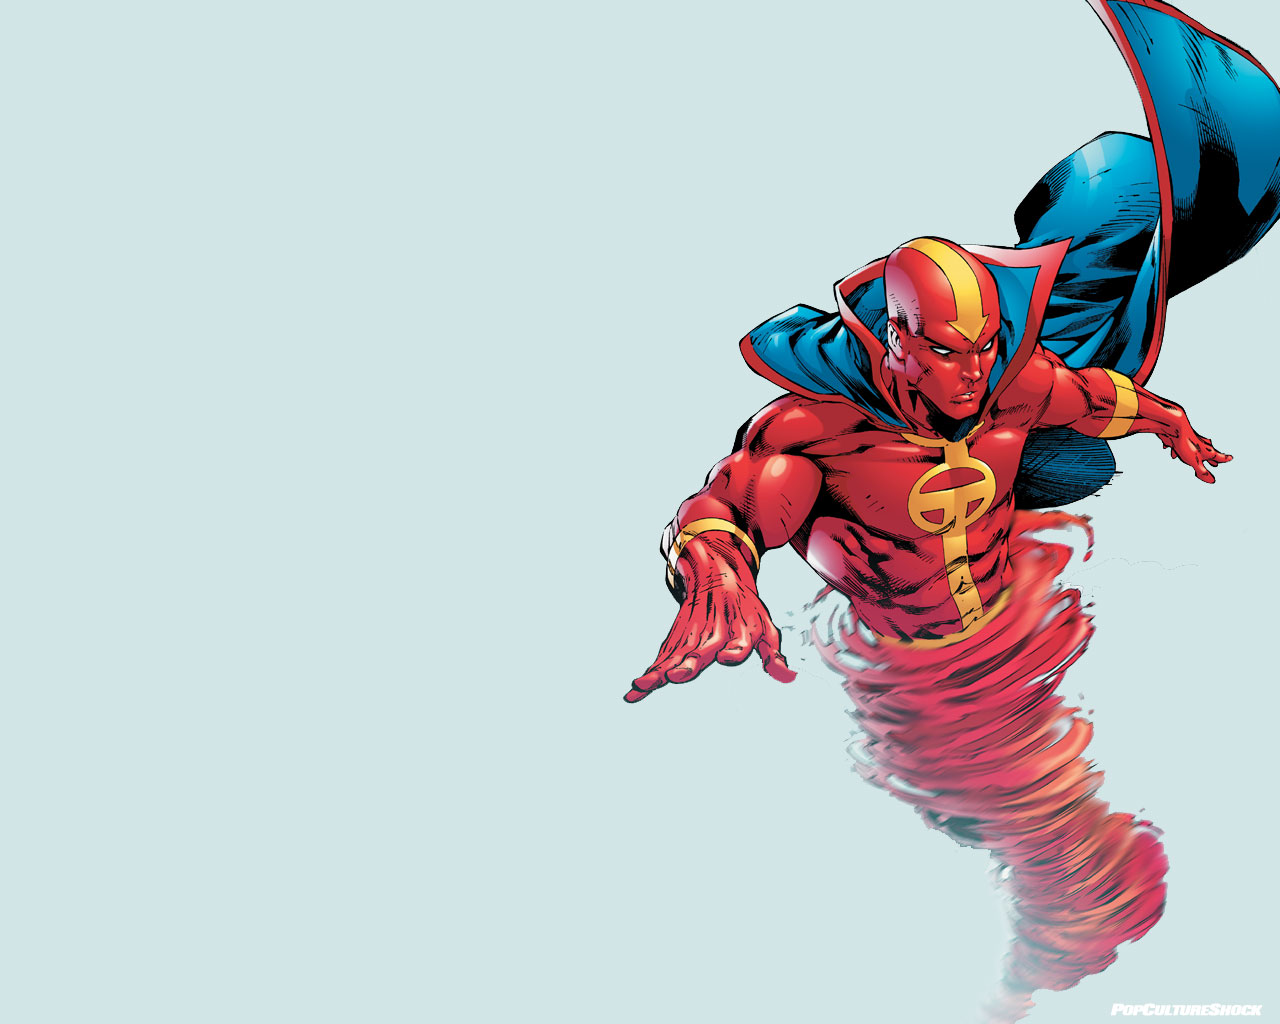 Wallpaper Of The Day Red Tornado Word Nerd